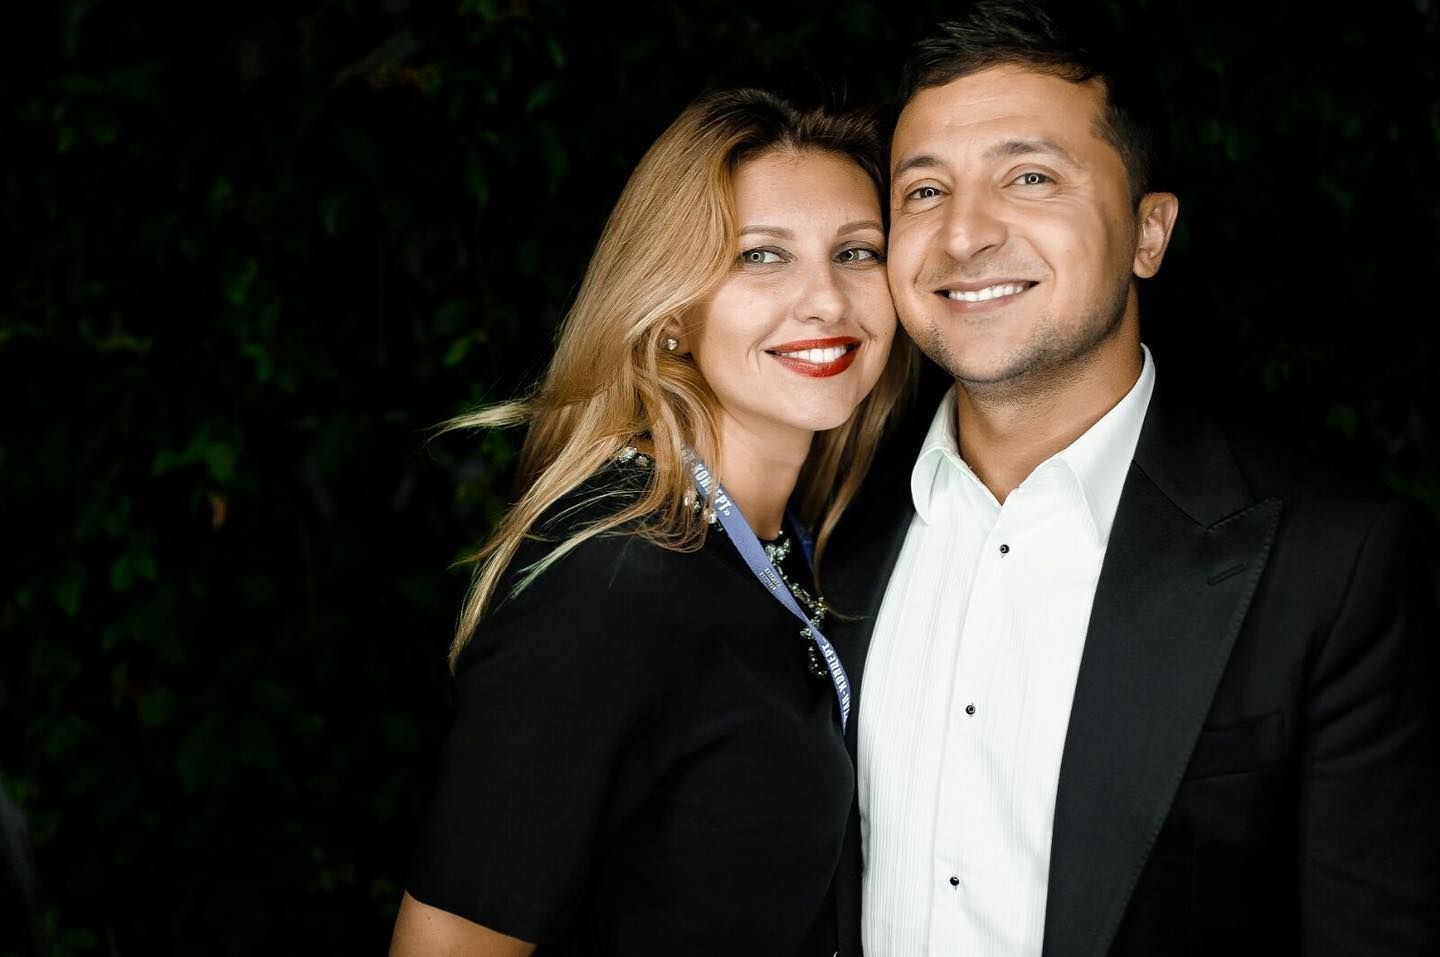 <p>In 2003, Volodymyr Zelensky married his longtime sweetheart, <a href="https://www.nationalworld.com/news/world/olena-zelenska-who-is-volodymyr-zelenskyys-wife-how-long-have-they-been-married-and-do-they-have-a-family-3602804">Olena Kiyashko</a>, now the first lady of Ukraine. Olena and Volodymyr grew up in the same city and even went to school together as children, but didn’t officially meet until university. In addition to being First Lady, Olena is a <a href="https://womenua.today/en/olena-zelenska-2/">writer</a> at <a href="https://kvartal95.com/en/history/">Studio Kvartal 95</a>, the production company she co-founded with a team, including her husband.</p><p><a href="https://www.instagram.com/p/B7vEN_0n0WR/">See photo on Instagram</a></p>